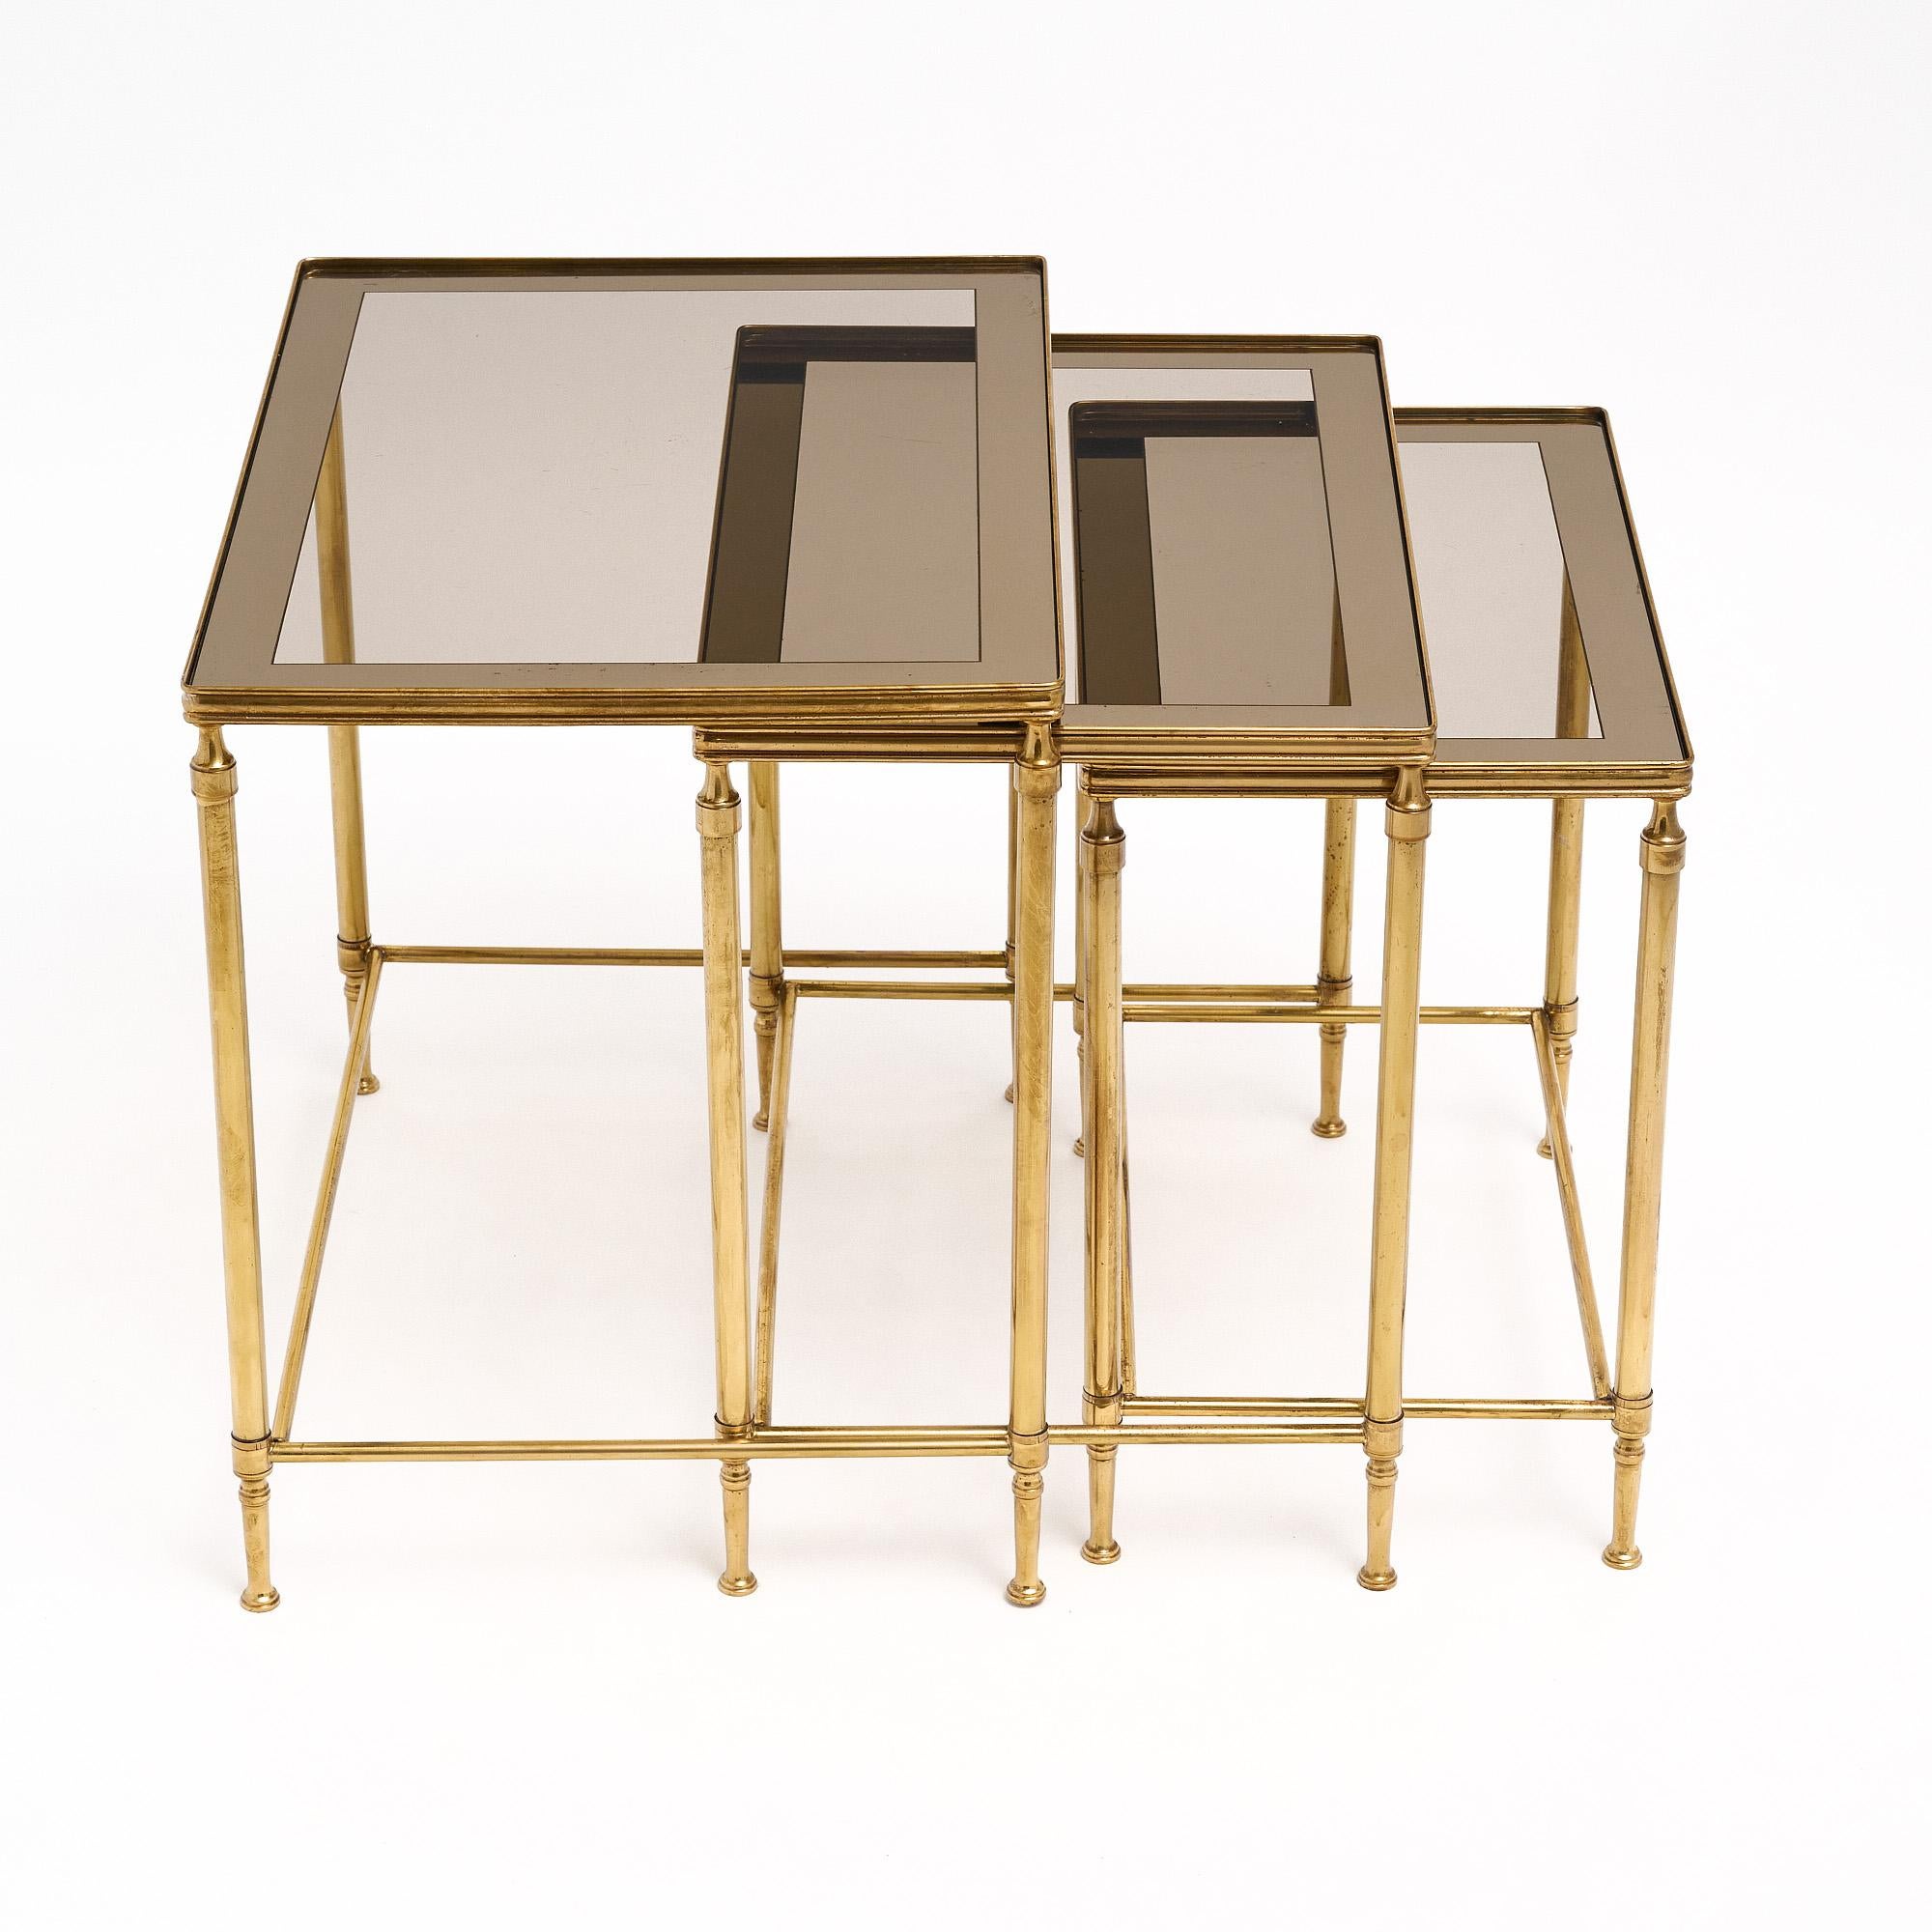 Late 20th Century French Art Deco Style Nesting Tables For Sale